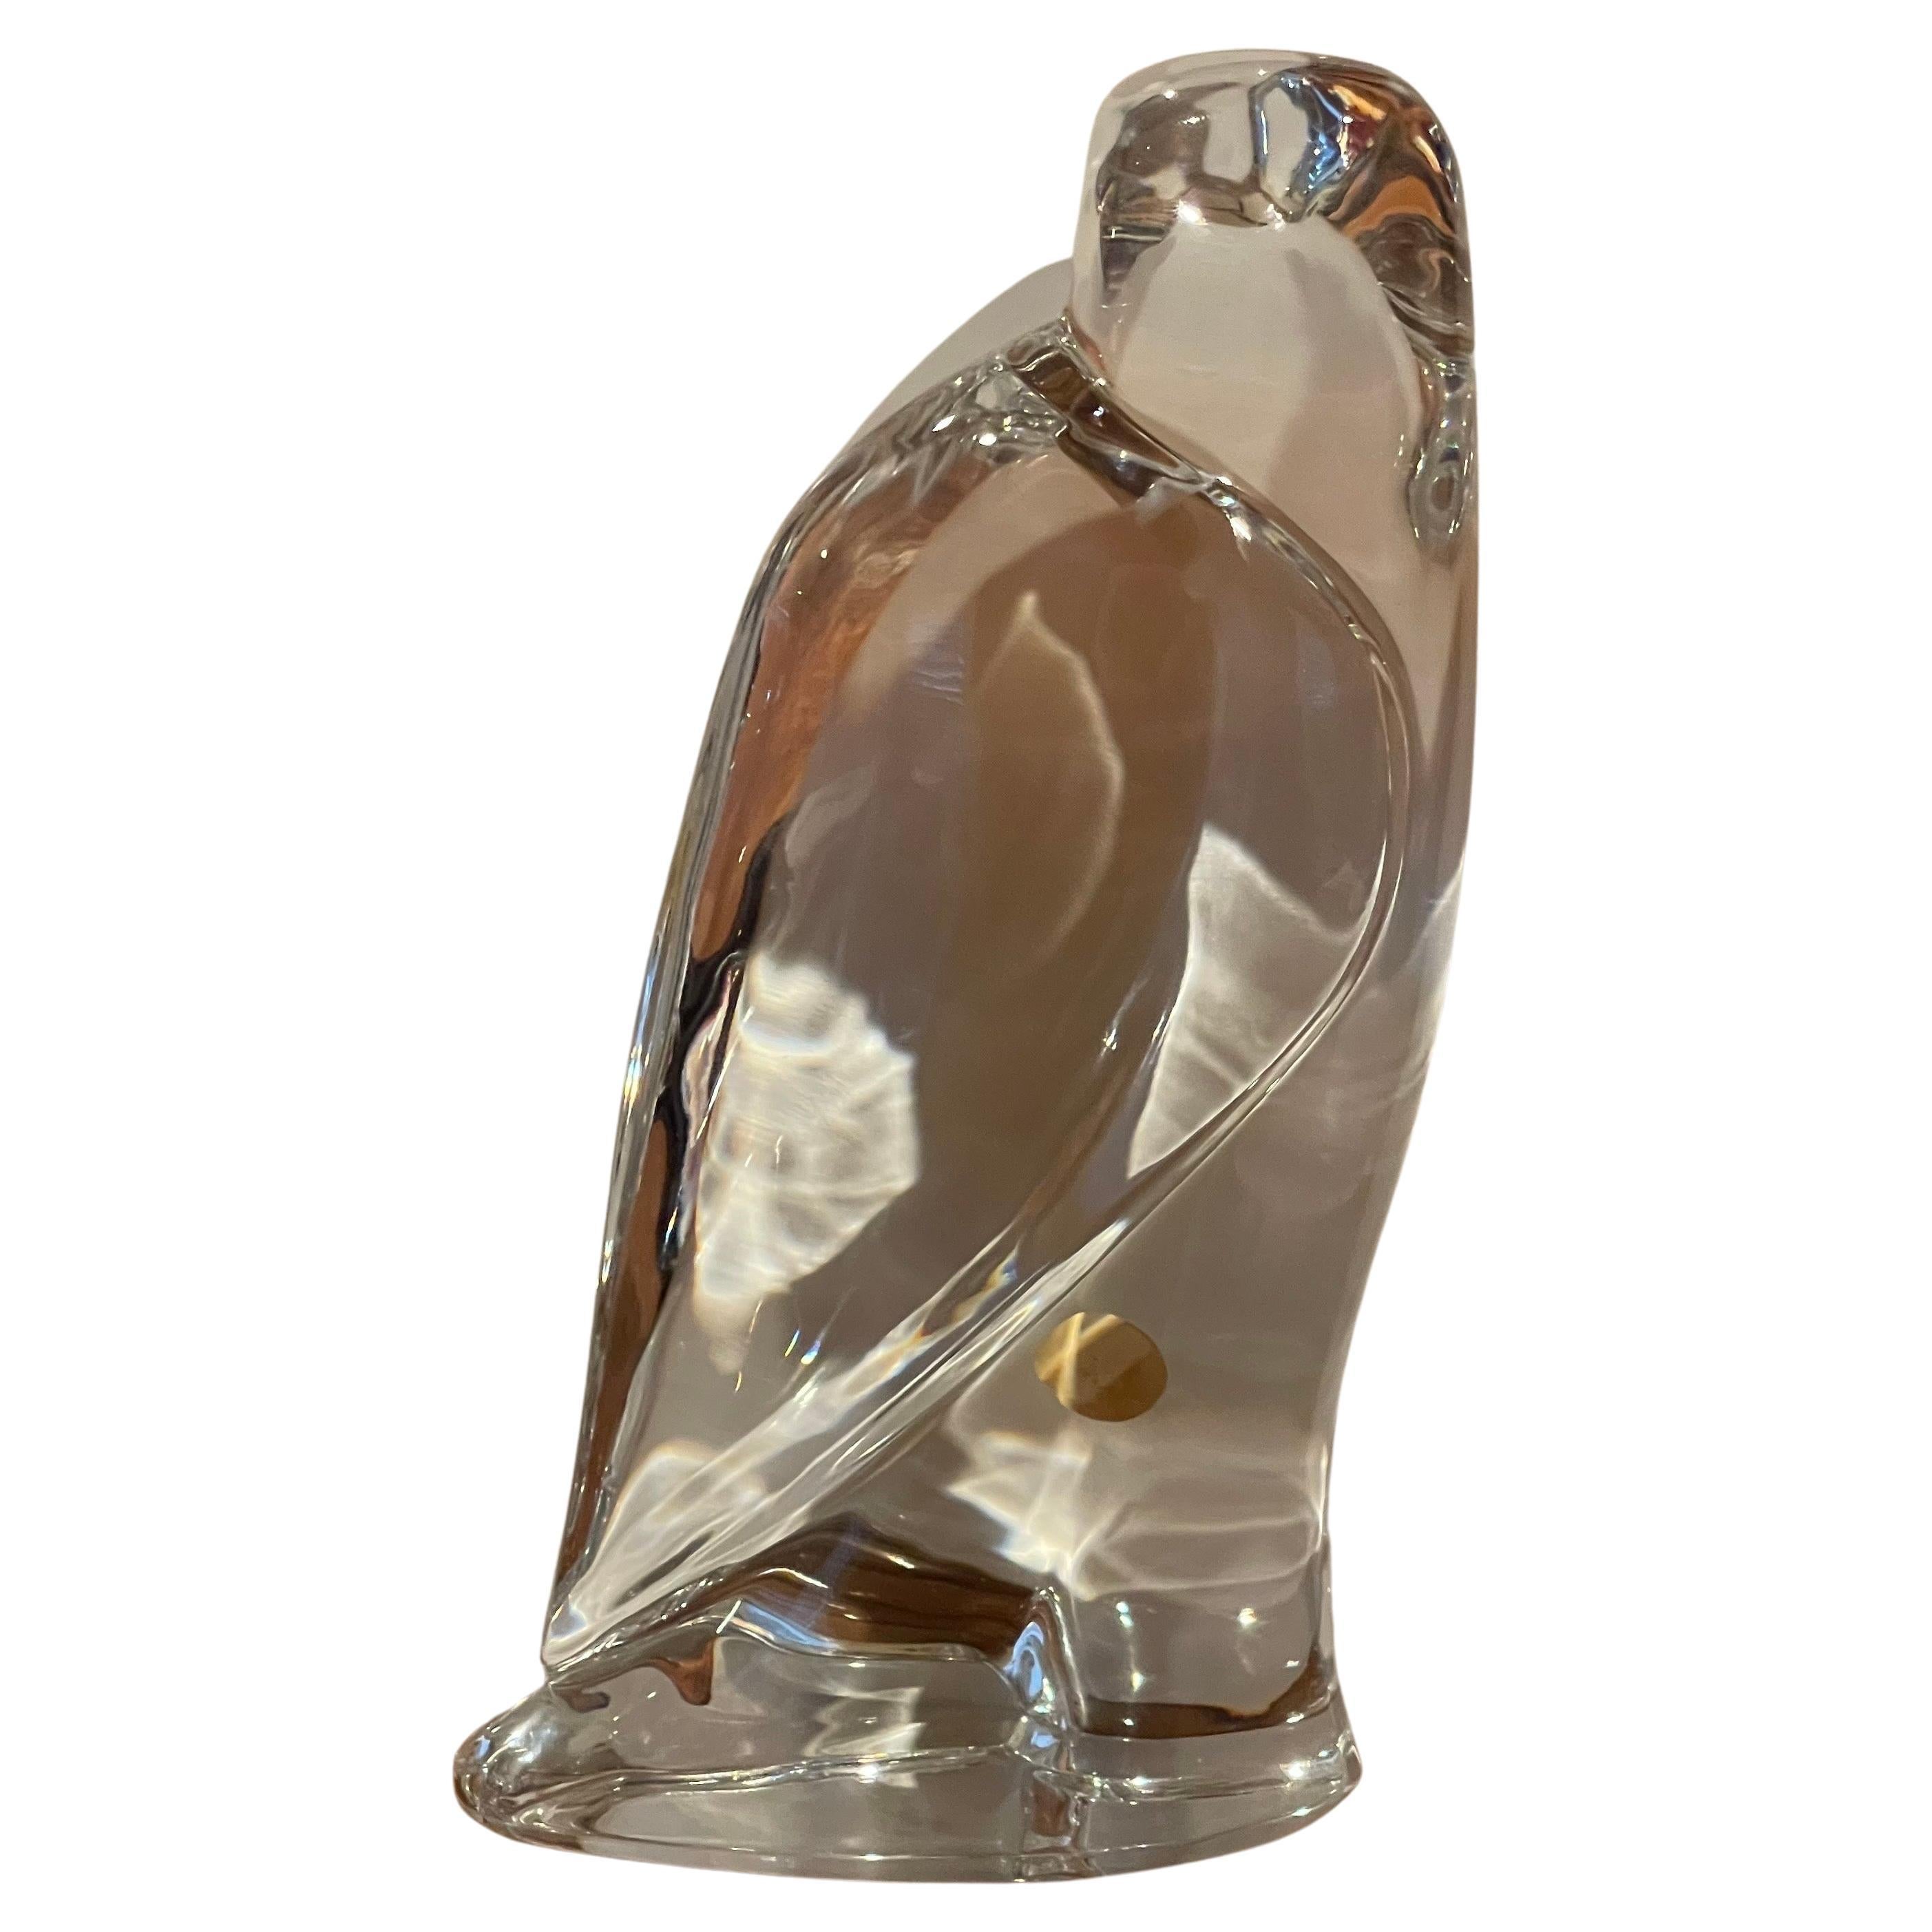 A beautiful crystal bald eagle sculpture by Val Saint Lambert of Belgium, circa 1970s. The piece is in very good vintage condition with no chips or cracks and measures 4